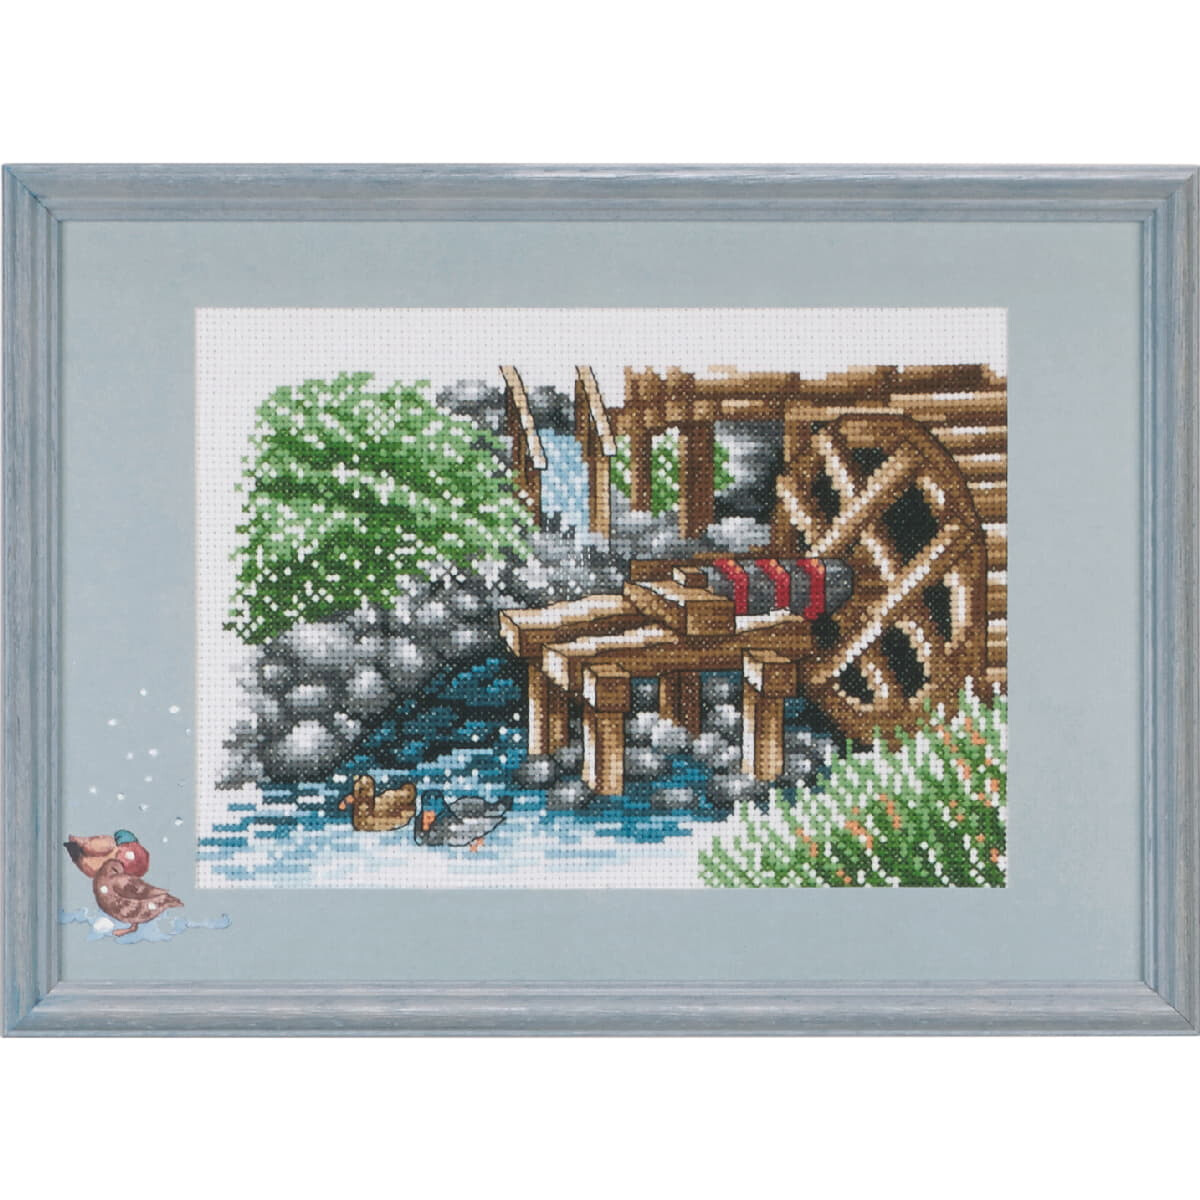 Permin counted cross stitch kit "Watermill",...